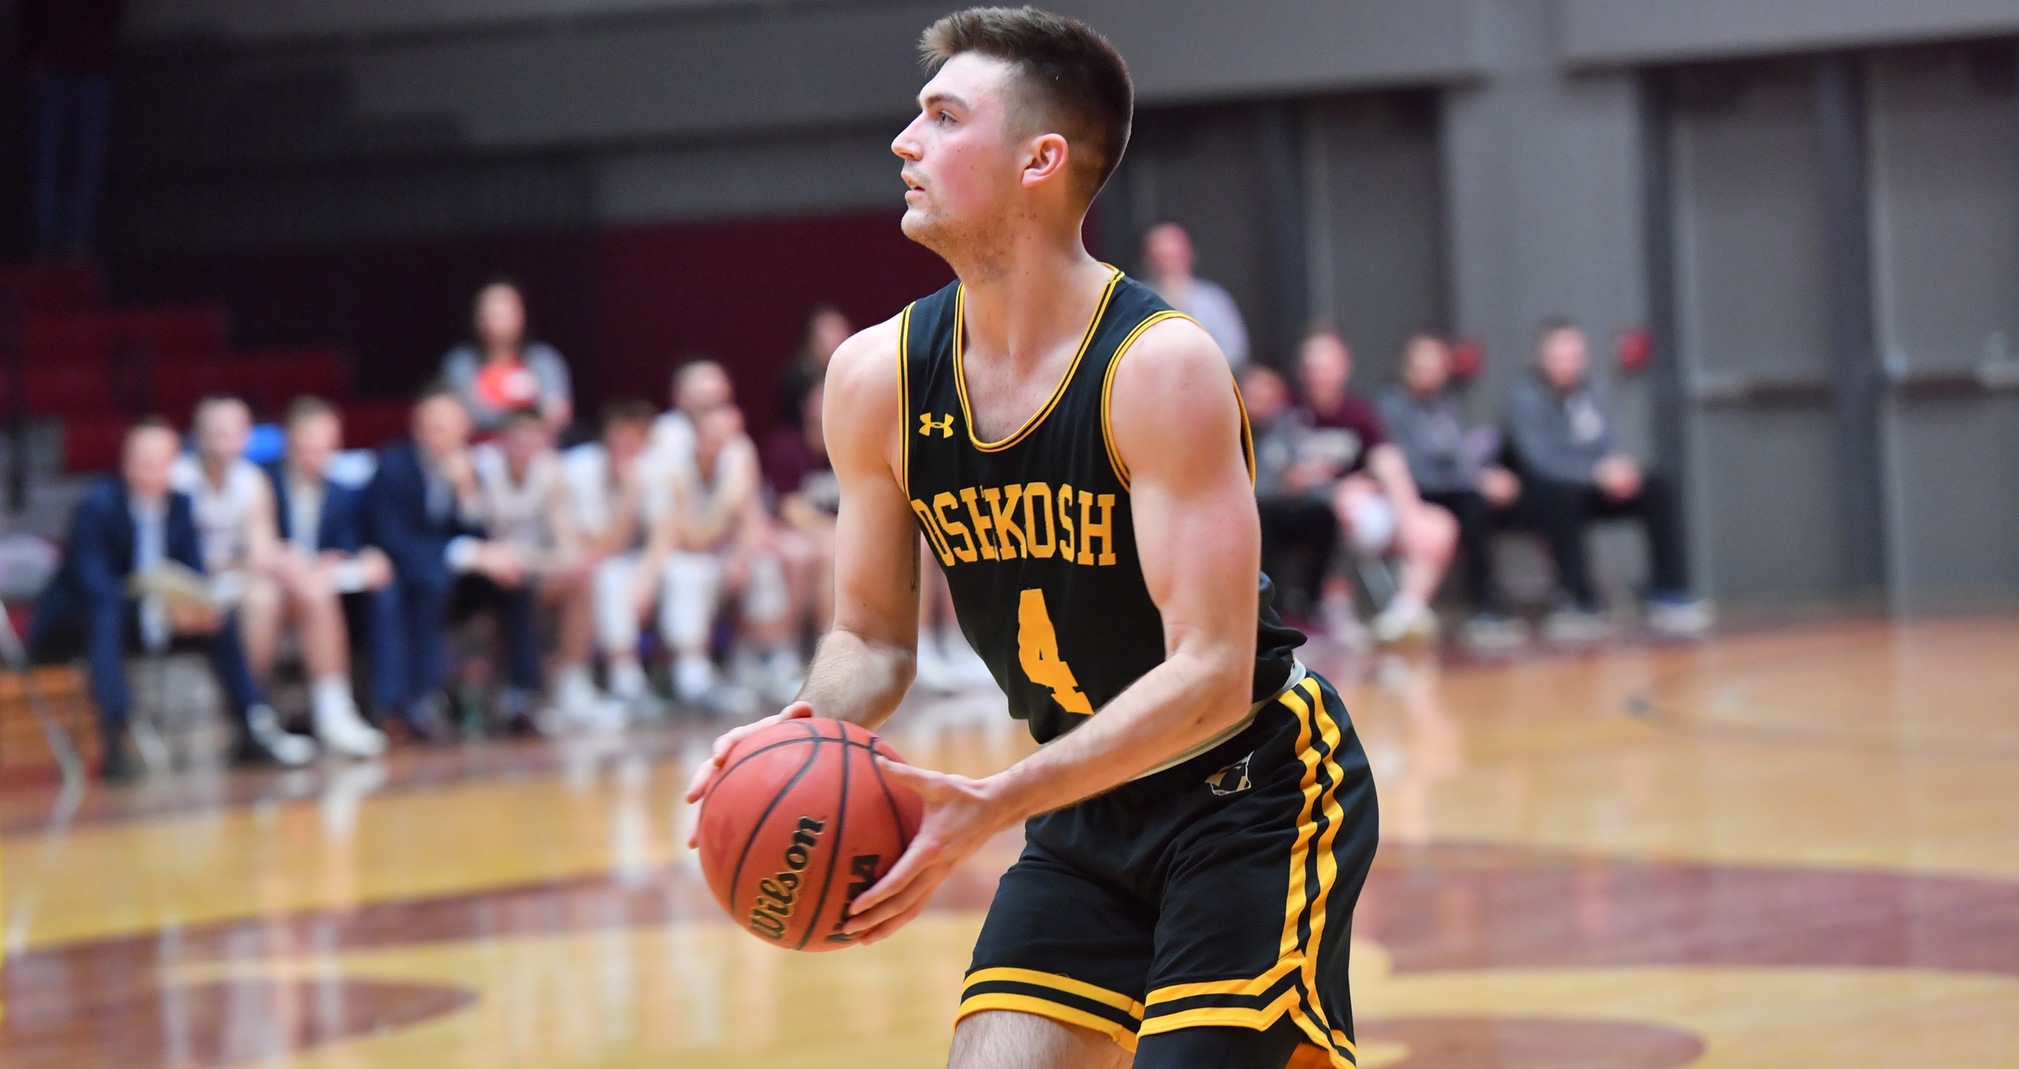 Brett Wittchow had 13 points and four assists against the Eagles.